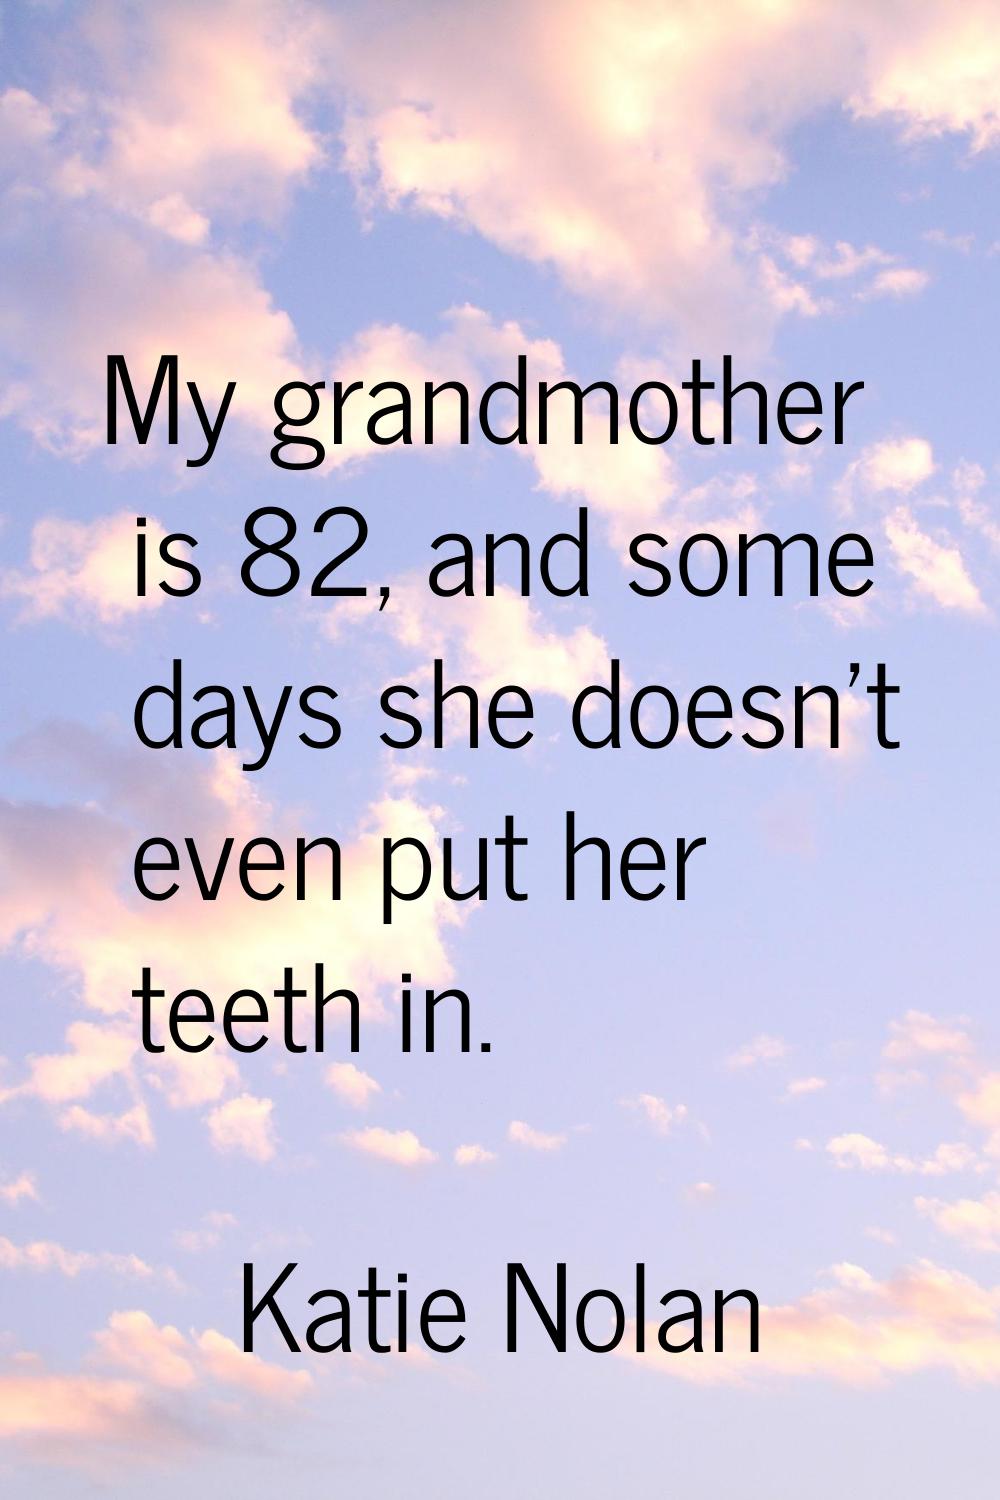 My grandmother is 82, and some days she doesn't even put her teeth in.